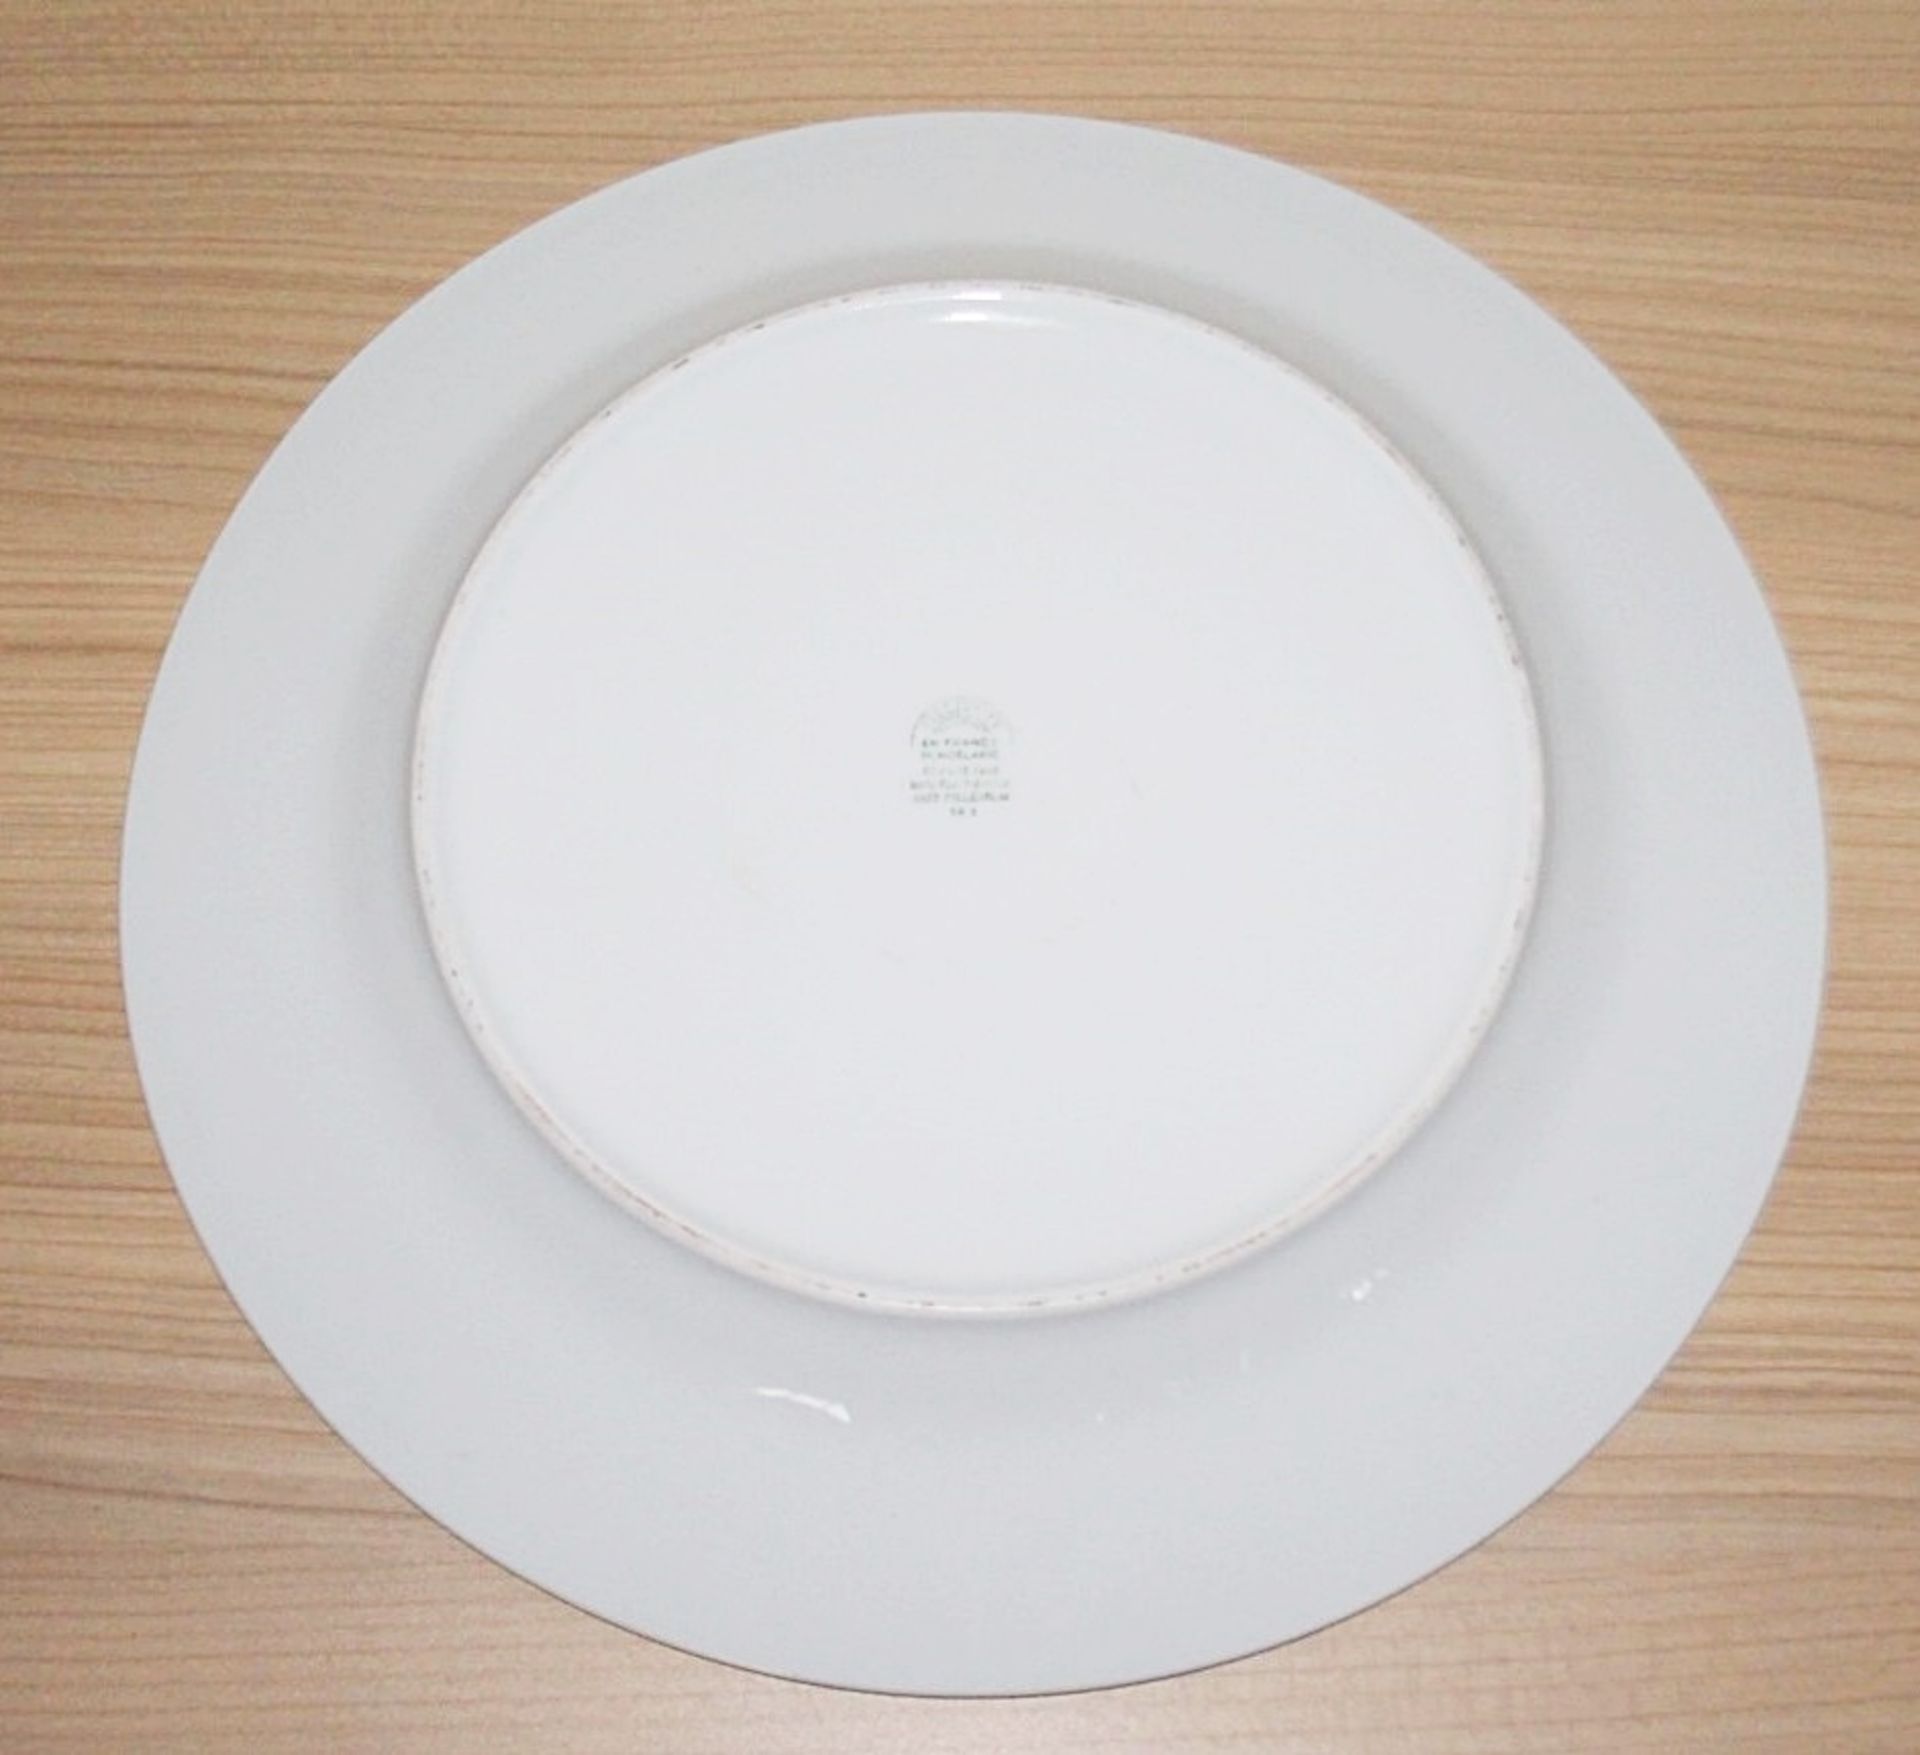 36 x PILLIVUYT Large Dinner Charger Plates In White Featuring 'Famous Branding' In Gold - - Image 3 of 5